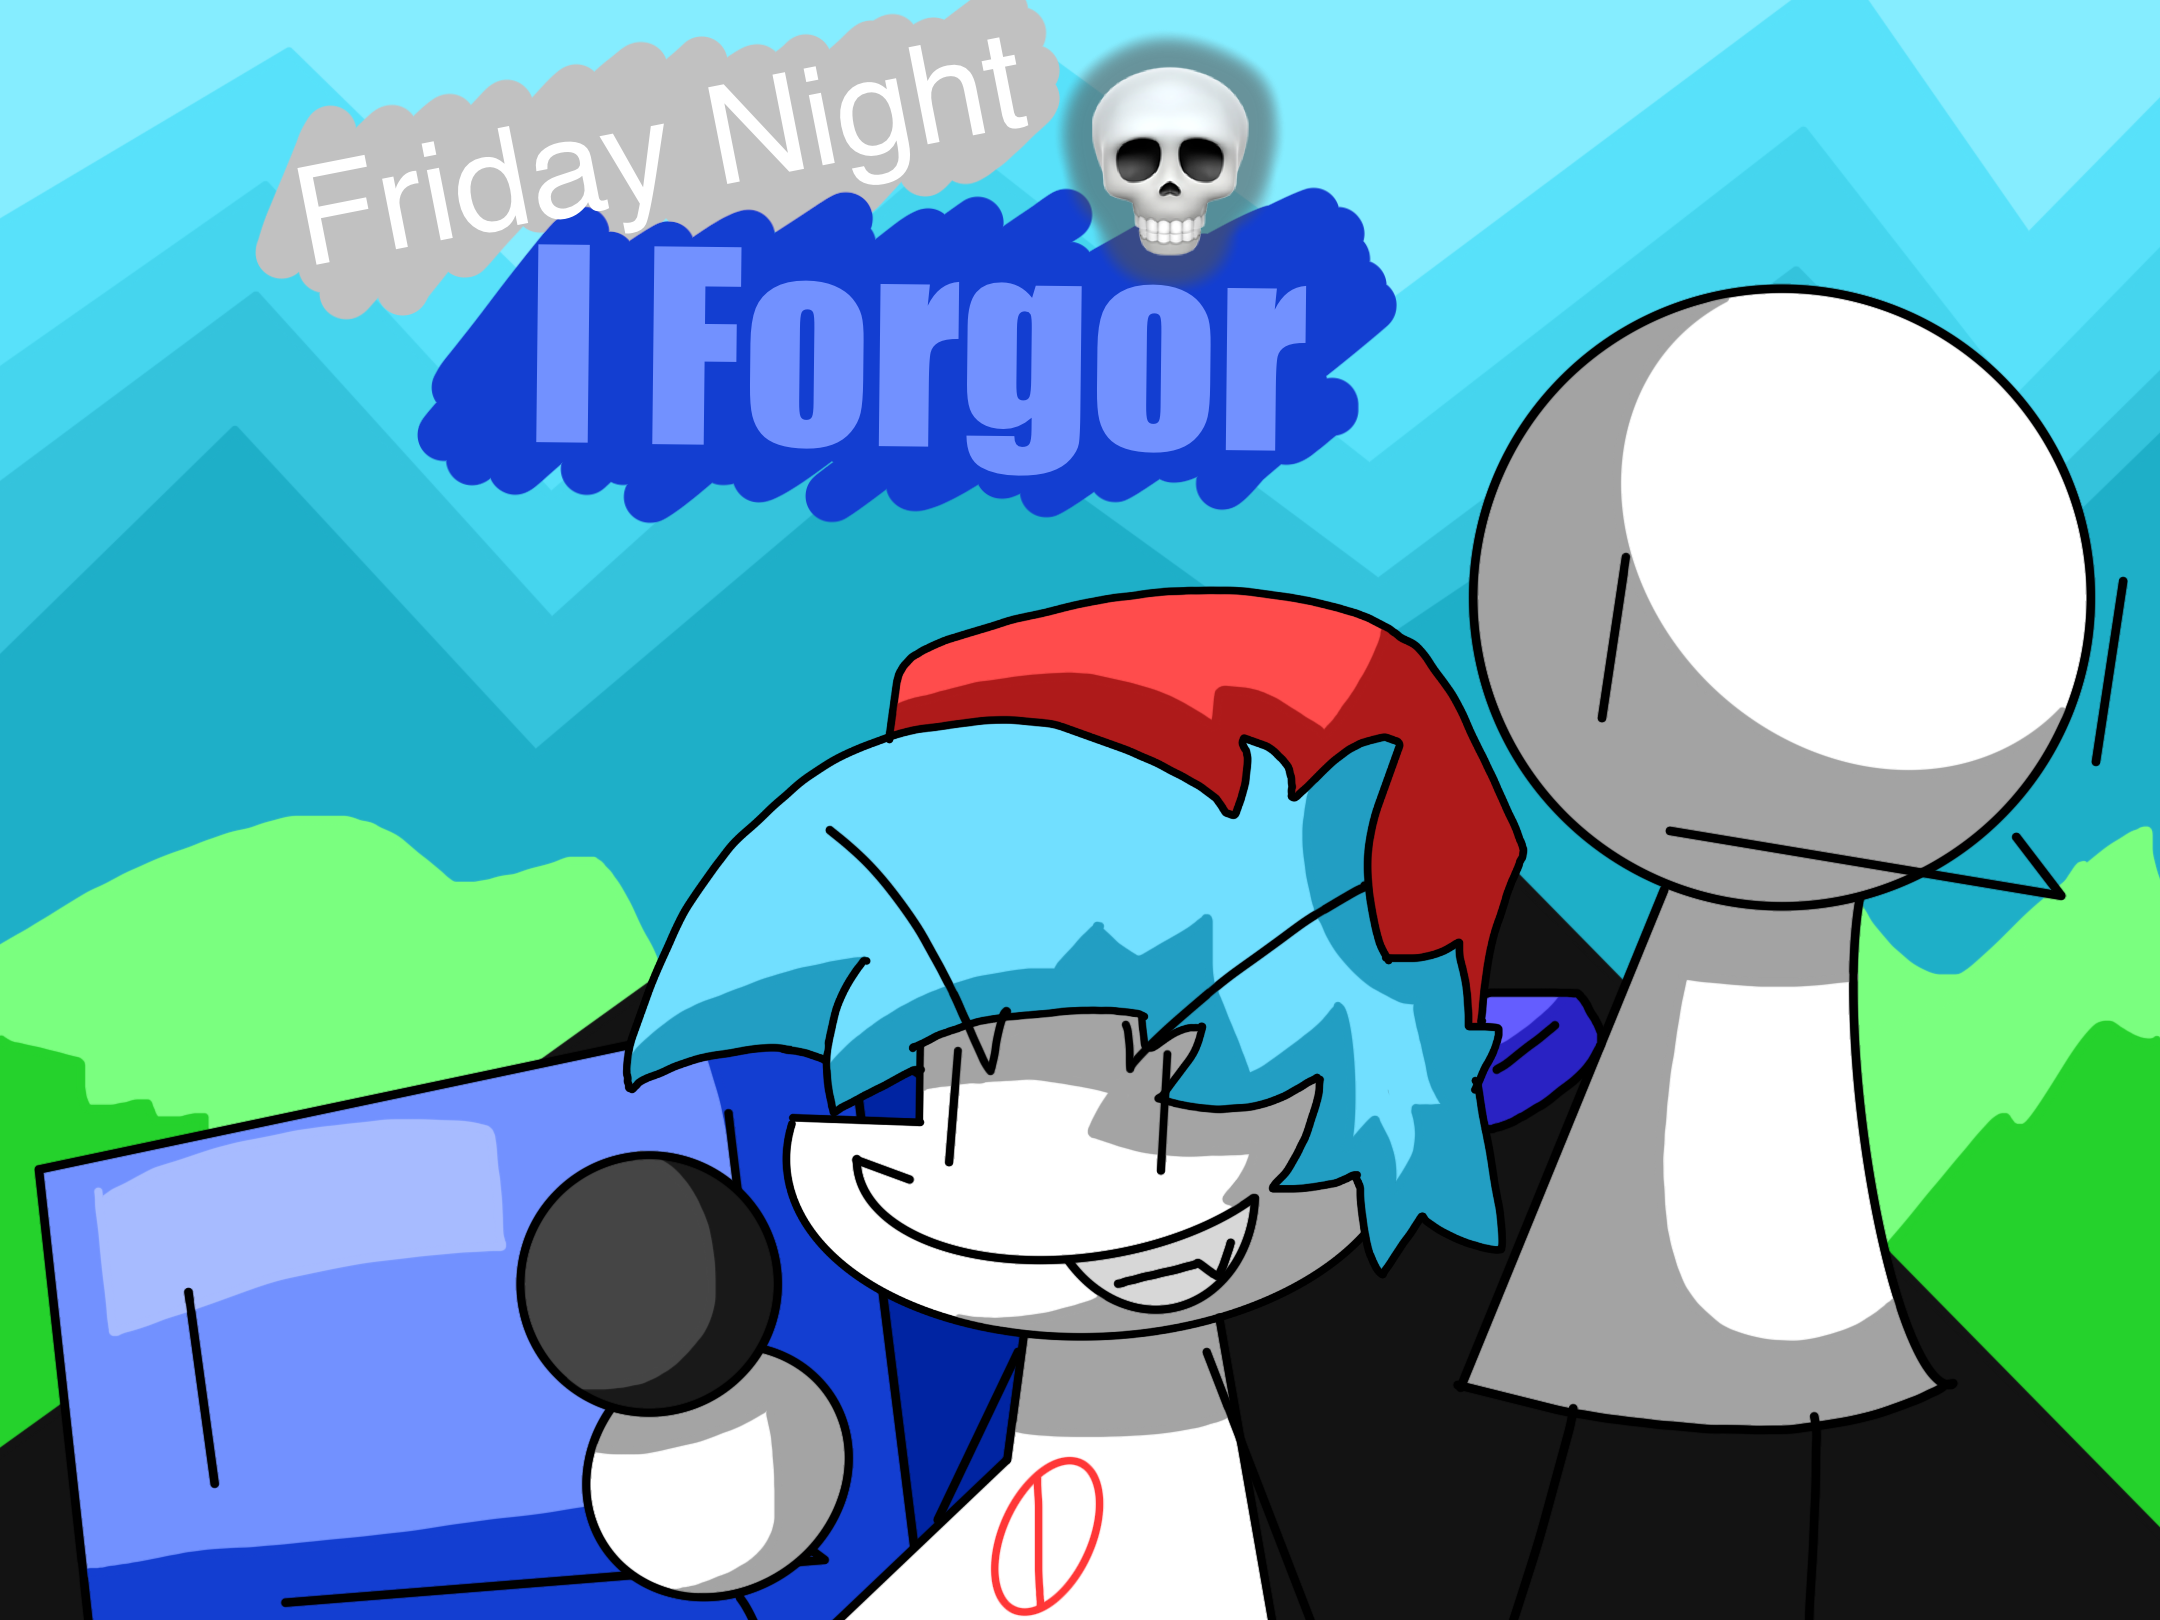 Newgrounds love letter if the art style was replicated flawlessly: :  r/FridayNightFunkin